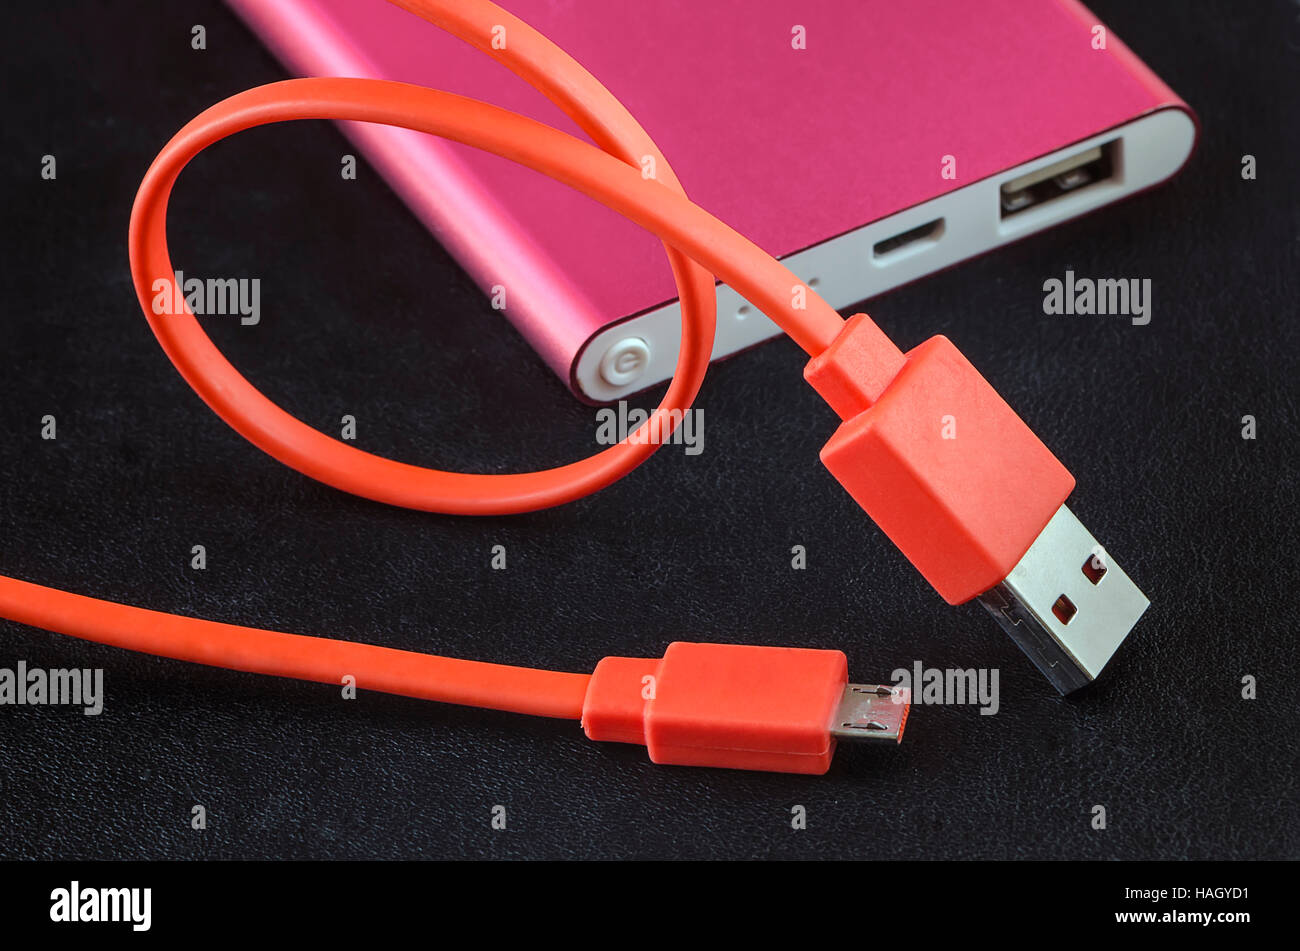 Orange color USB cable and red power bank on black leather background. Stock Photo